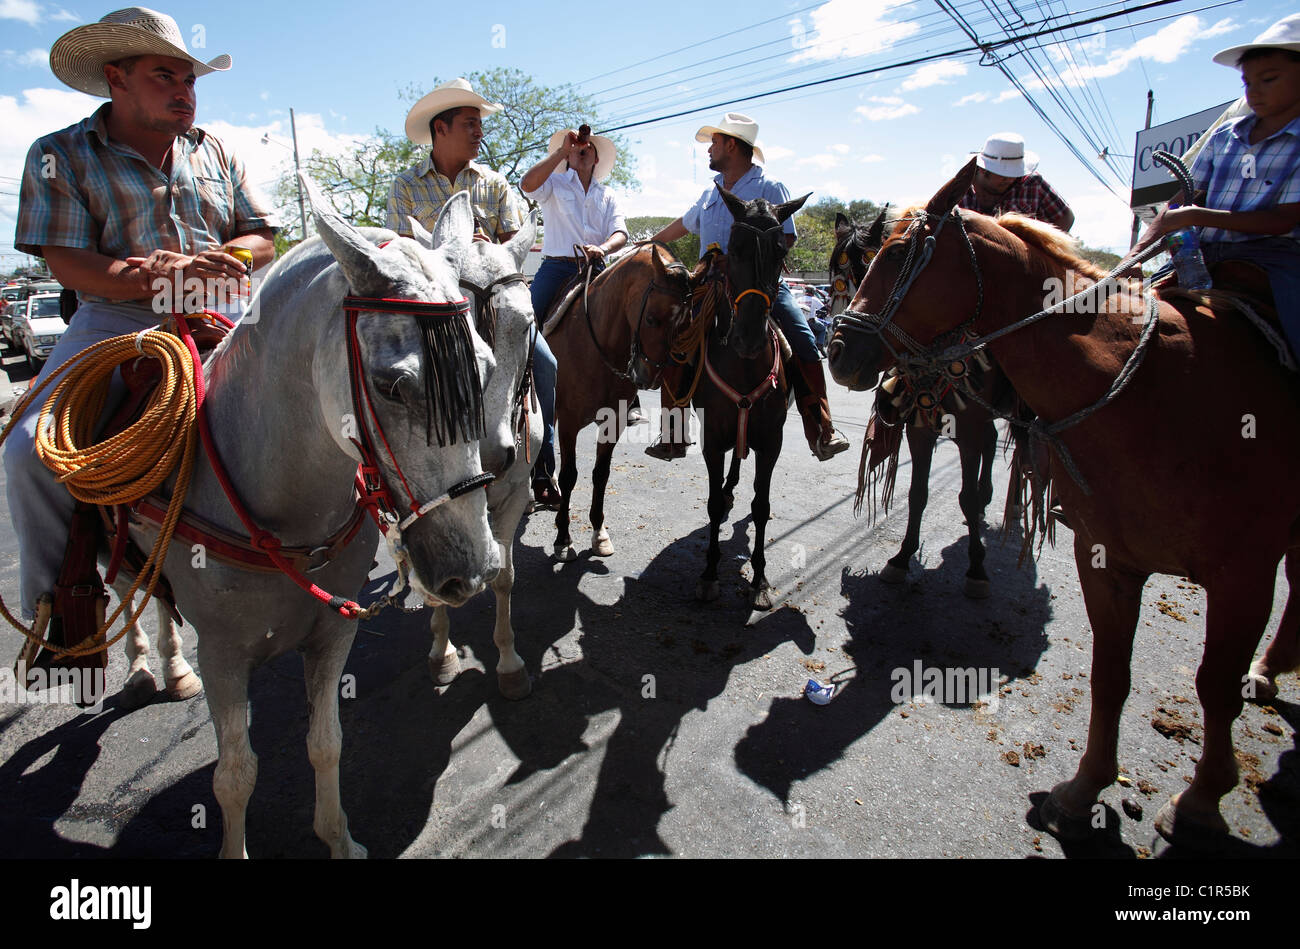 Costa Rican men on horses drink beer after participating in a horse parade during a civic festival in Liberia, Costa Rica Stock Photo